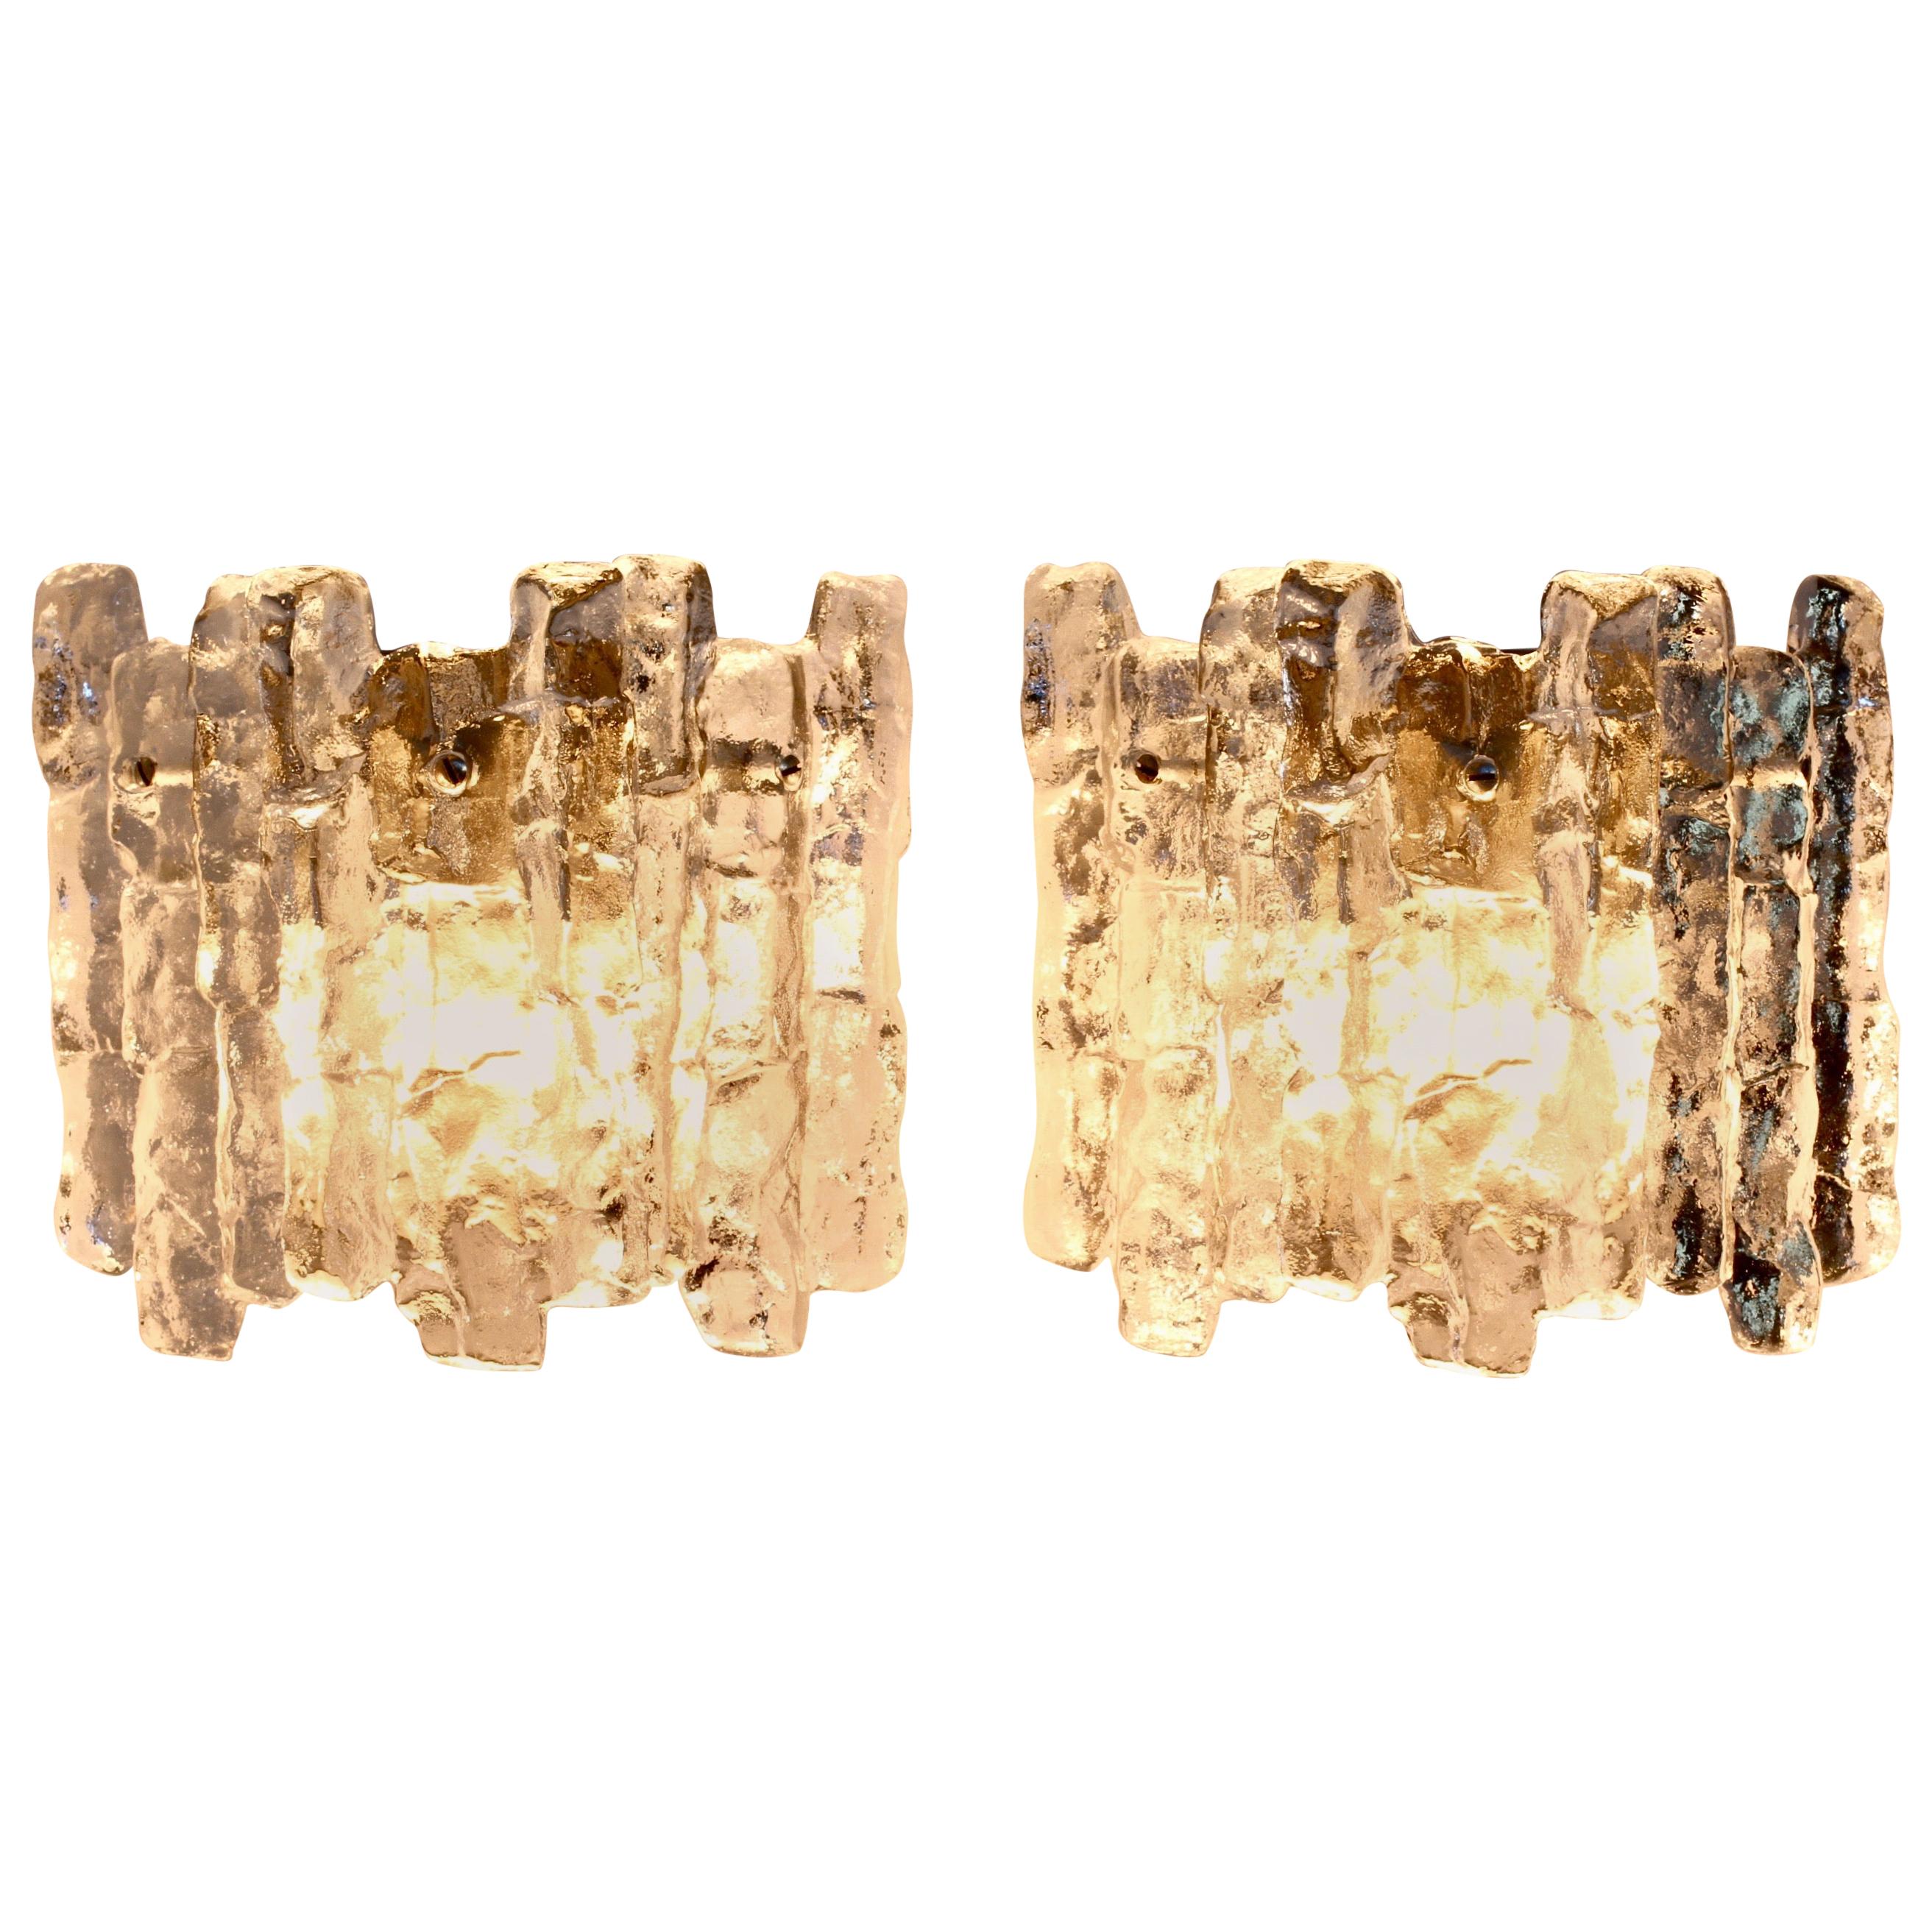 Pair of midcentury Austrian made ice glass wall sconces by Kalmar, circa 1965. Featuring three hanging glass elements resembling melting ice crystals suspended from a nickel coloured mount or bracket.

Can be used with original pull switch (not